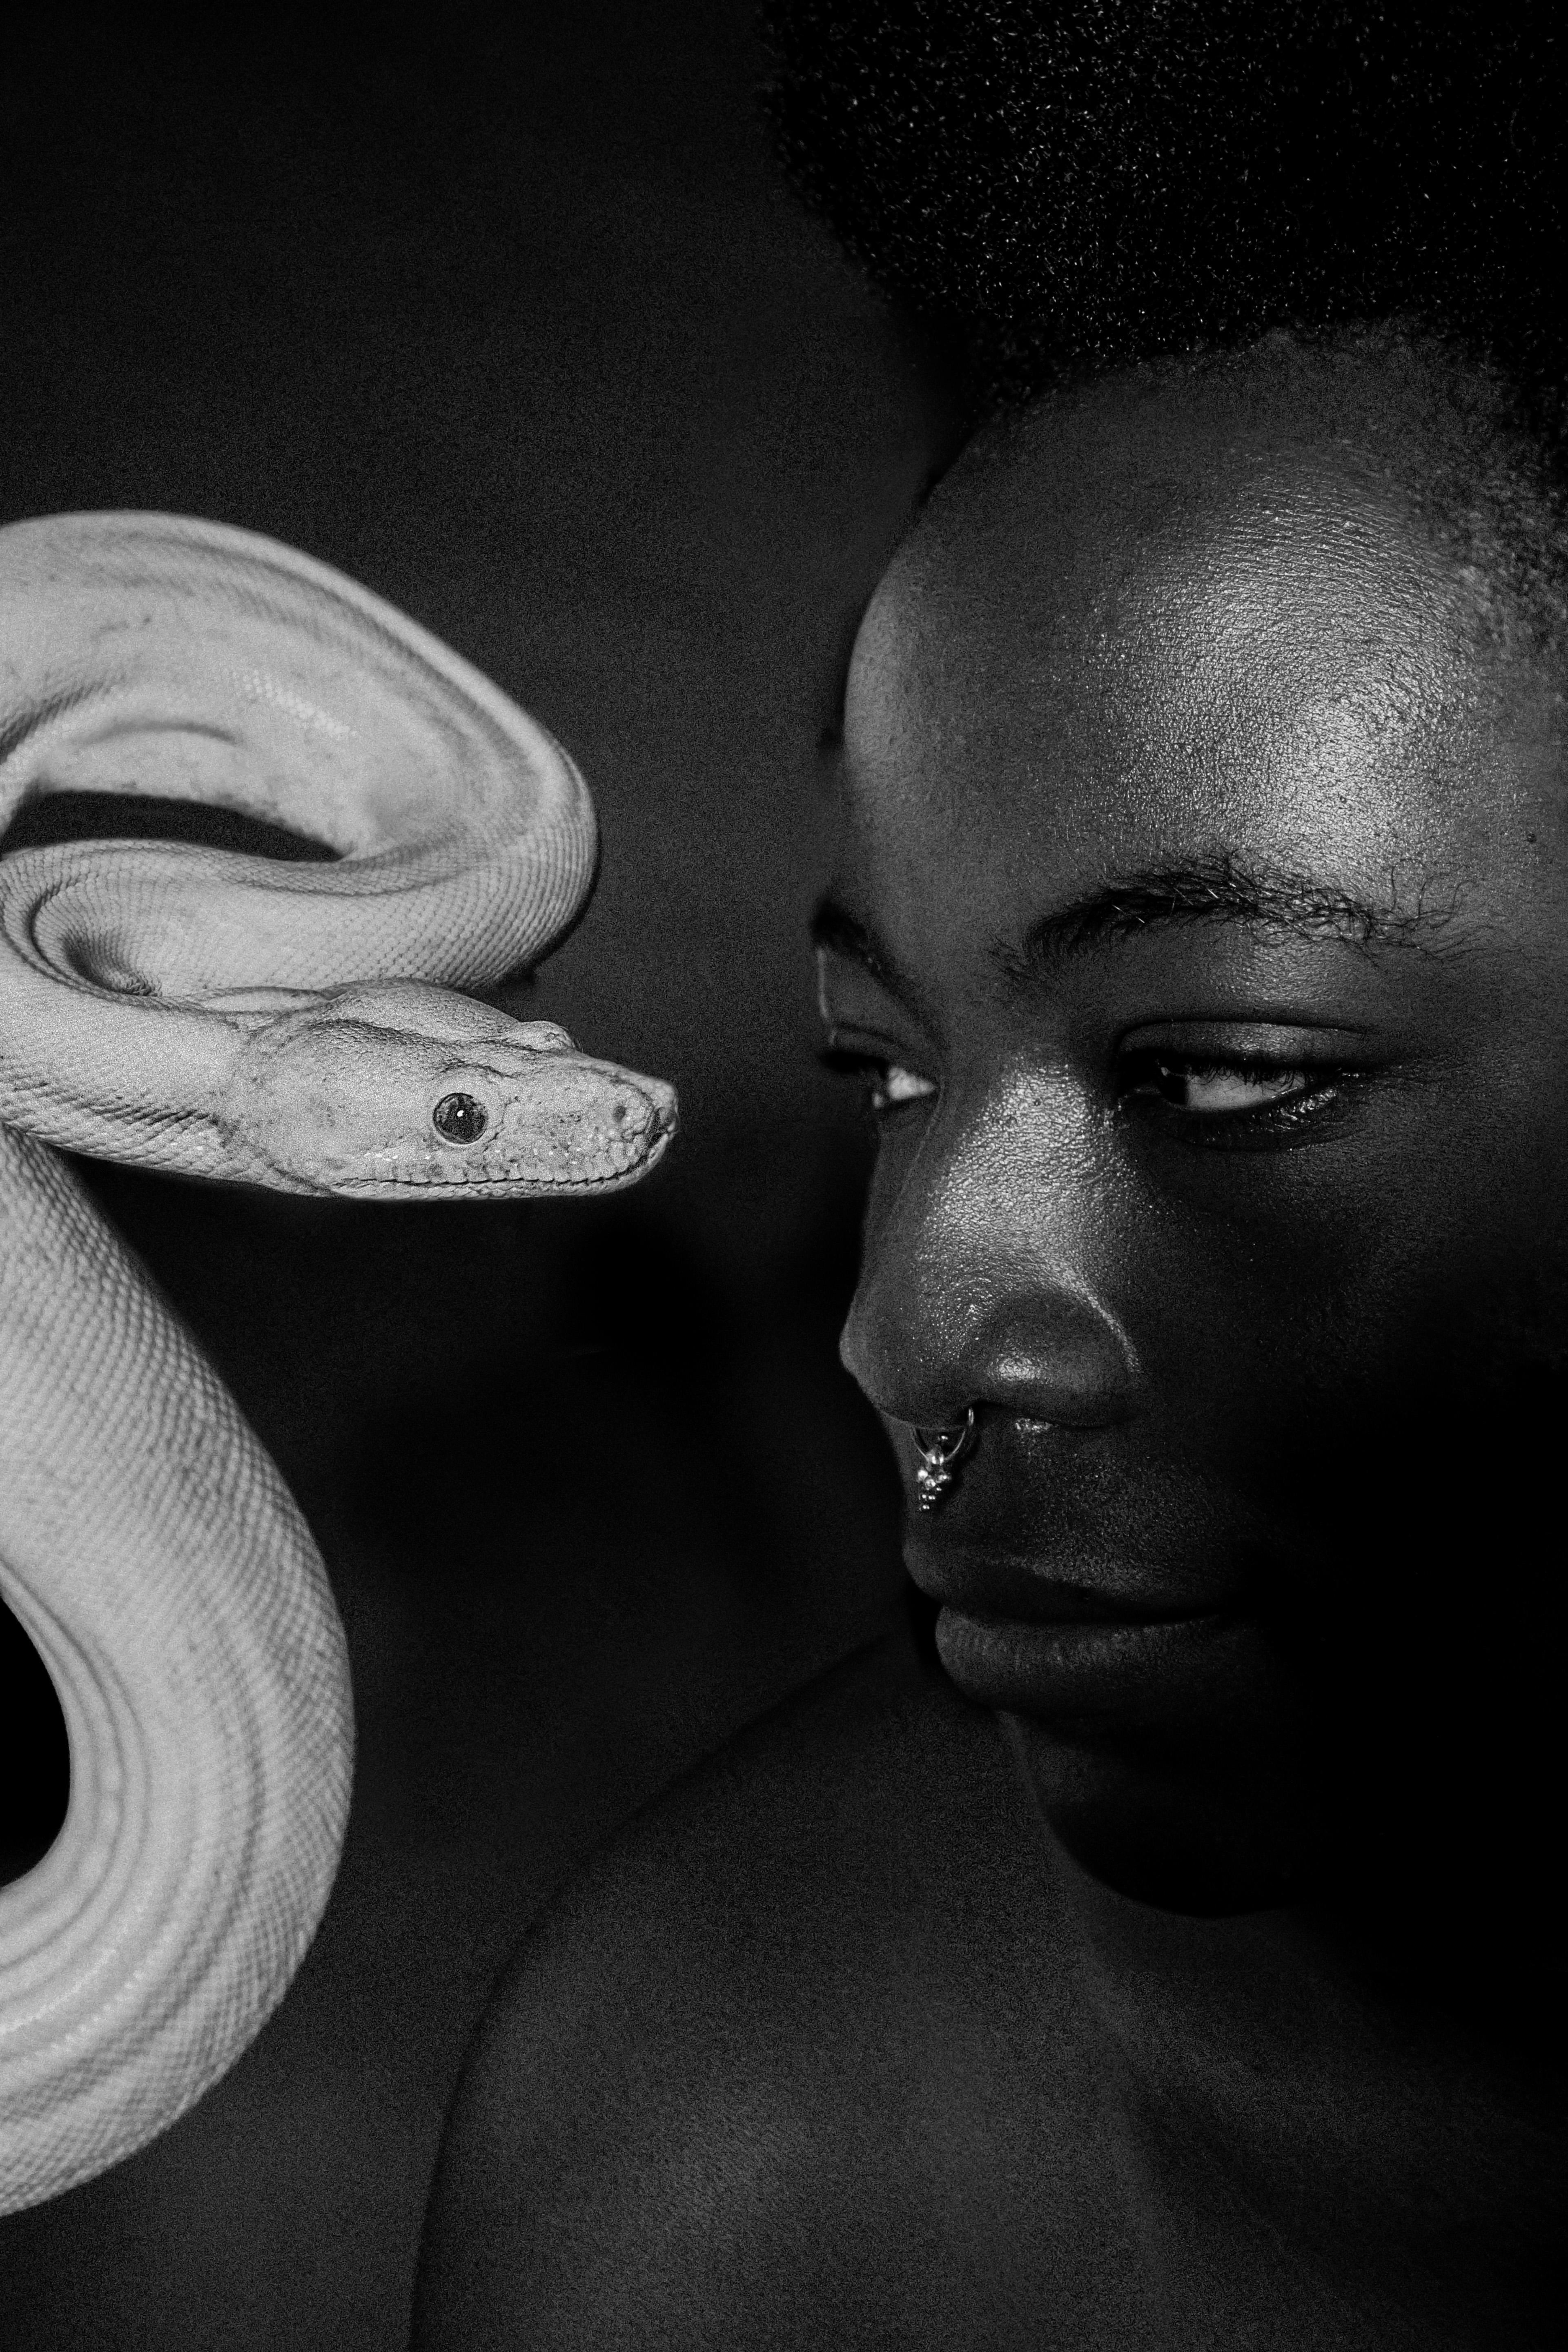  ''The Whisperer'' Fine Art Photography Limited Edition Print Of TWO - Black Portrait Photograph by Laurentina Miksys